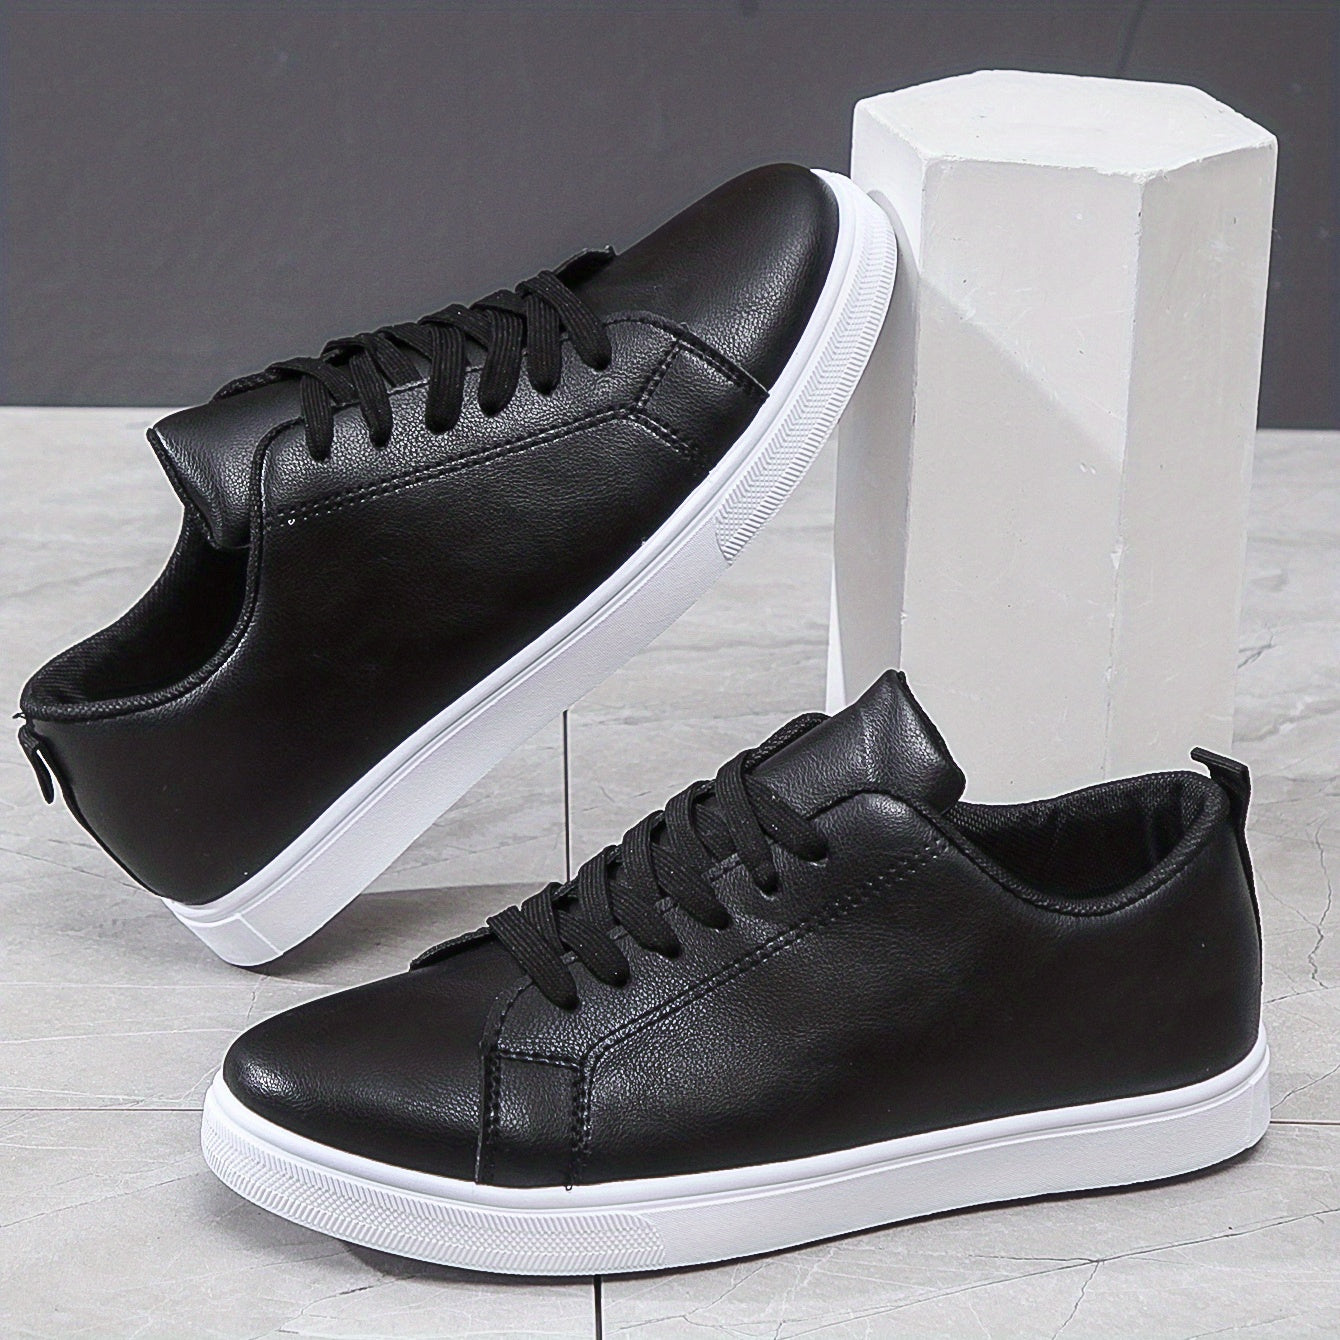 Men's Lace-up Sneakers, PU Leather Skate Shoes With Good Traction, Breathable